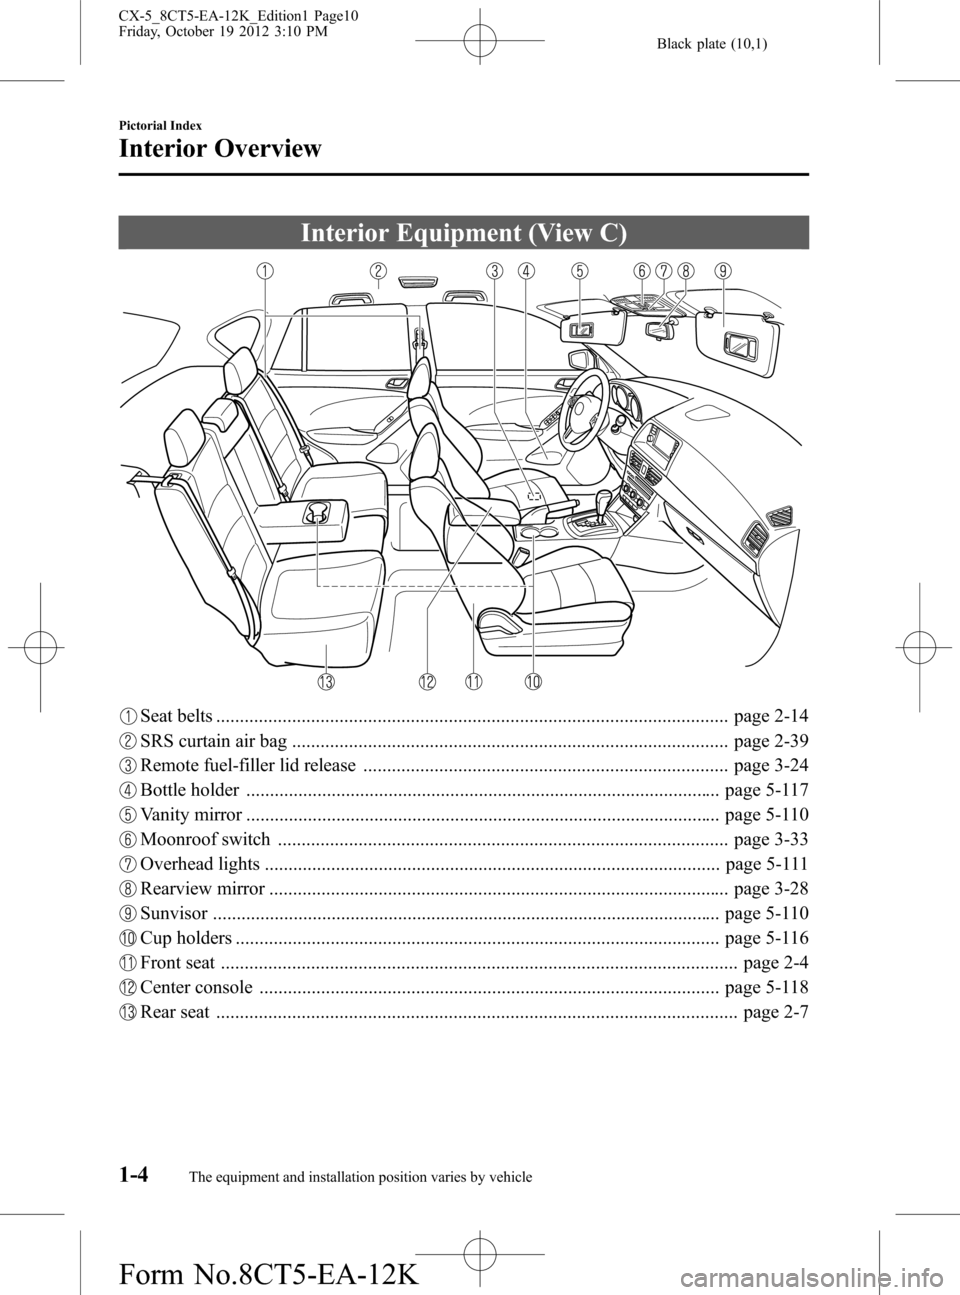 MAZDA MODEL CX-5 2014  Owners Manual (in English) Black plate (10,1)
Interior Equipment (View C)
Seat belts ............................................................................................................ page 2-14
SRS curtain air bag ...